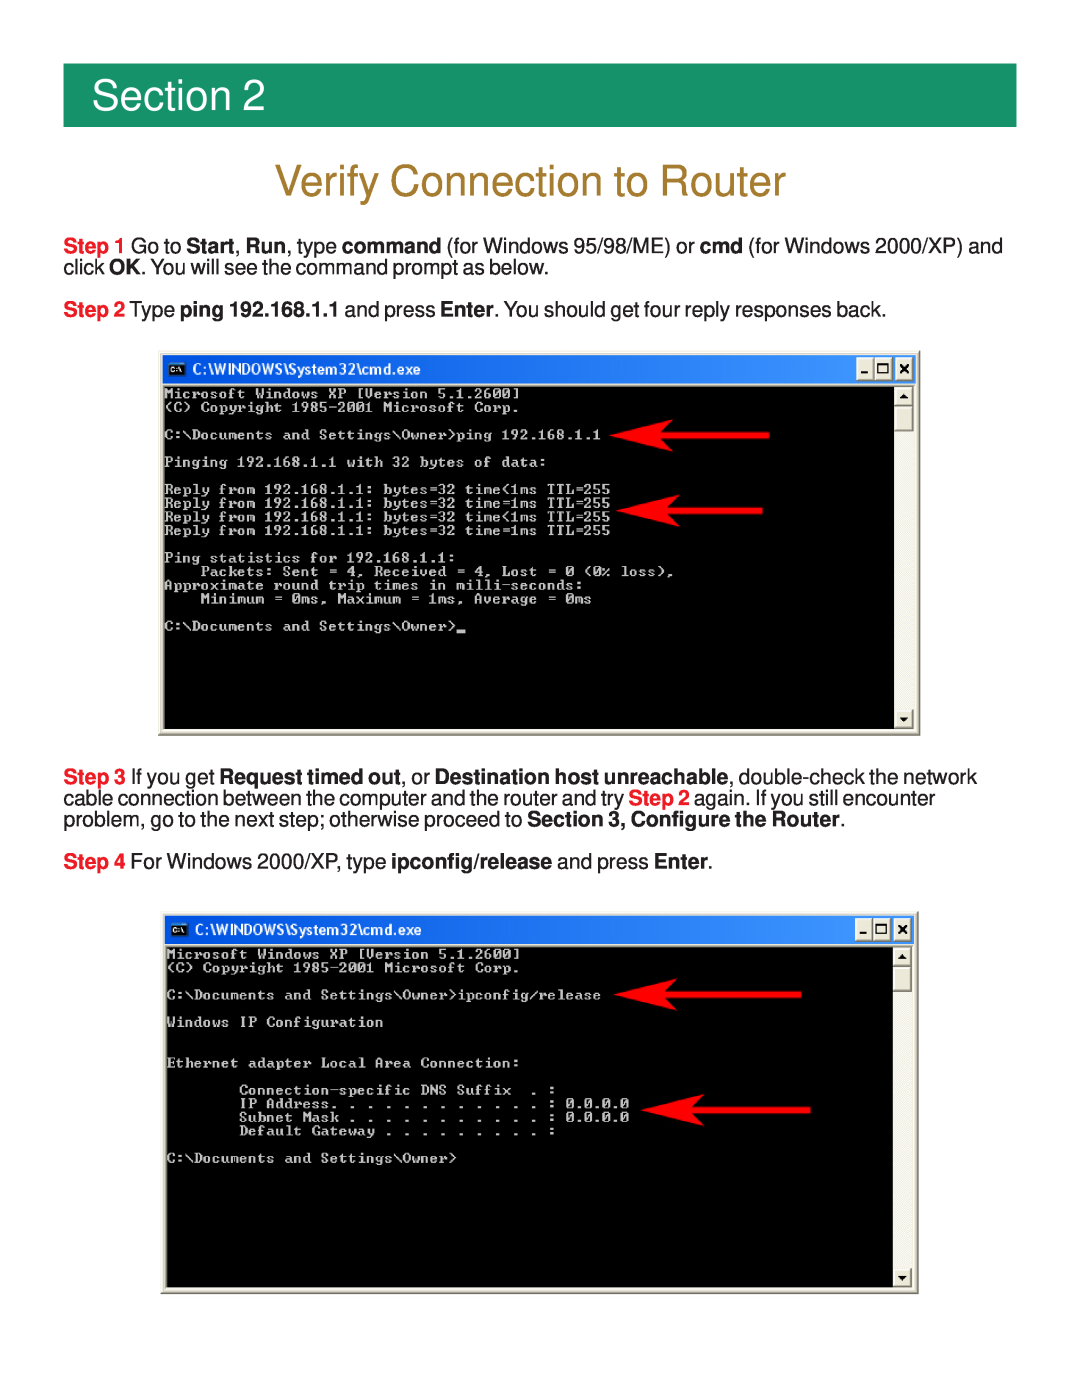 Airlink101 AR504 manual Verify Connection to Router, Section 